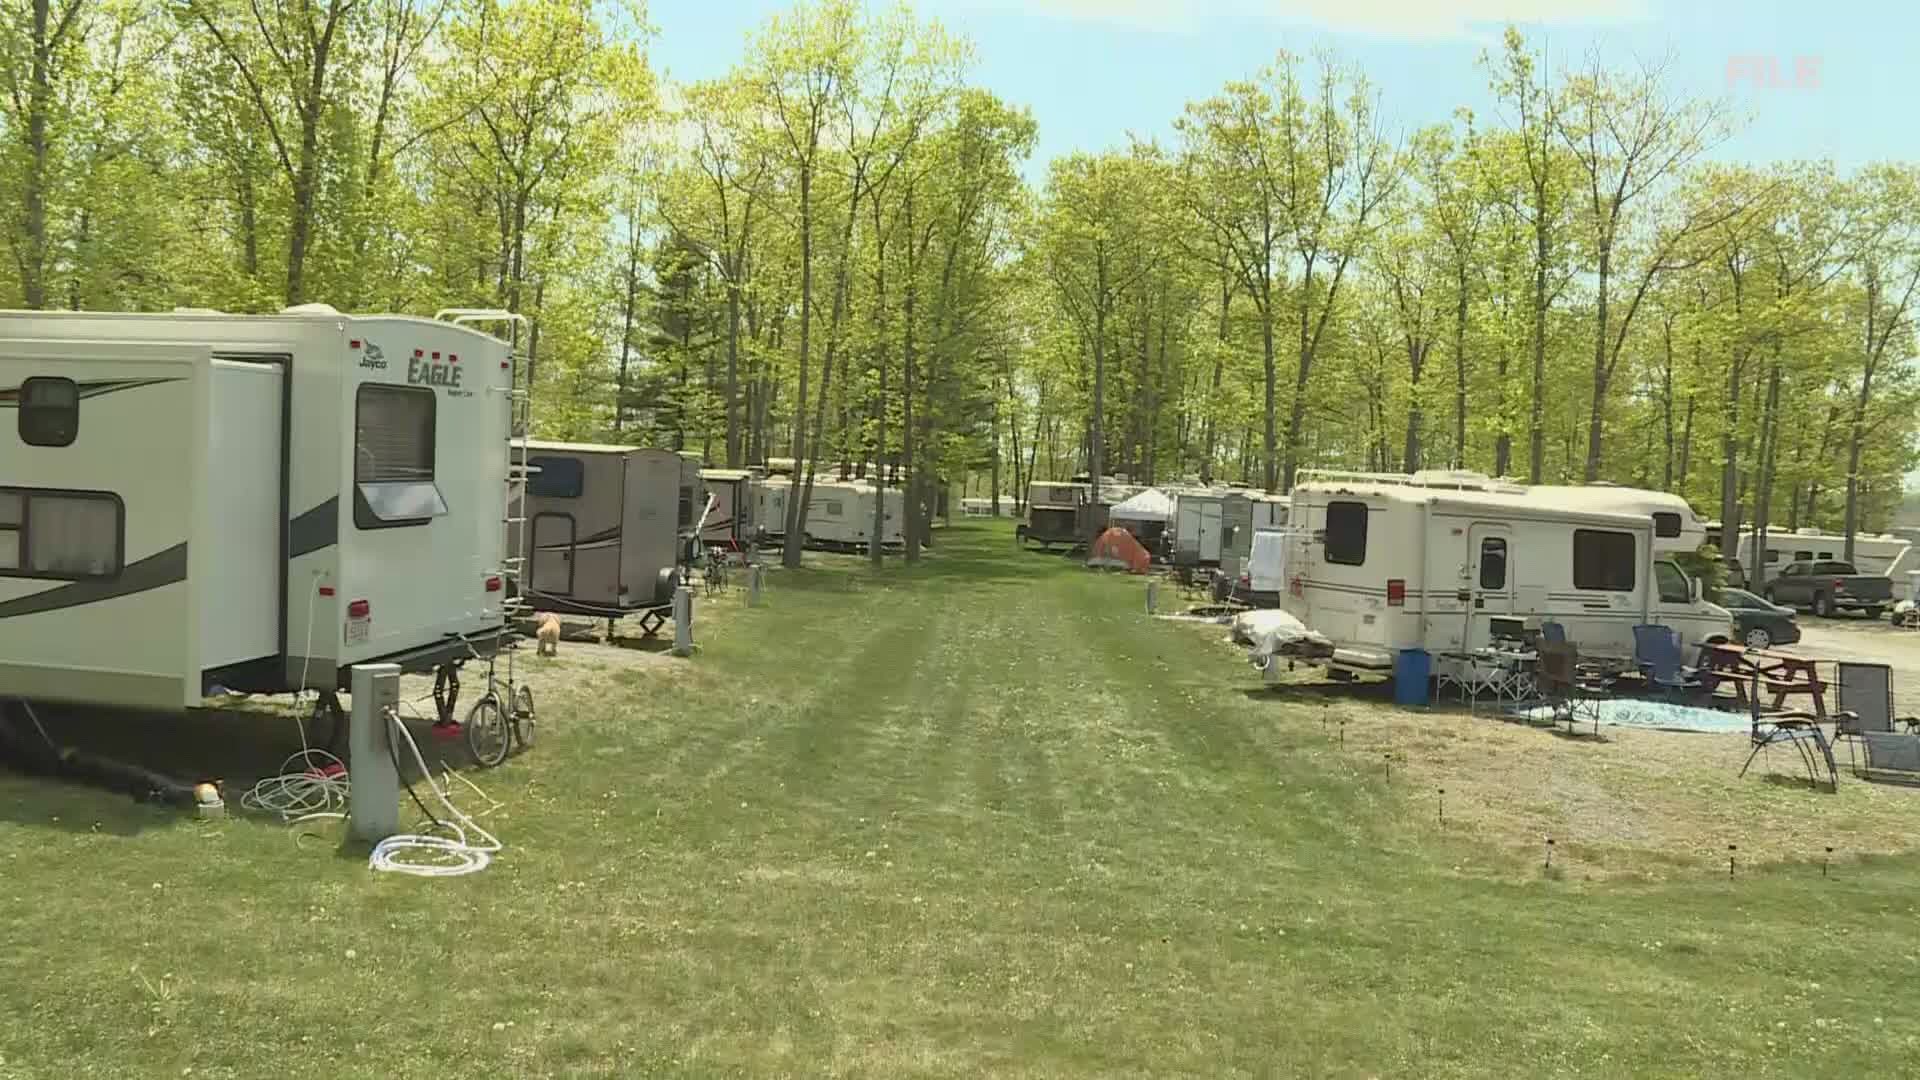 Gov. Mills accelerates plan to reopen campgrounds ahead of Memorial Day weekend